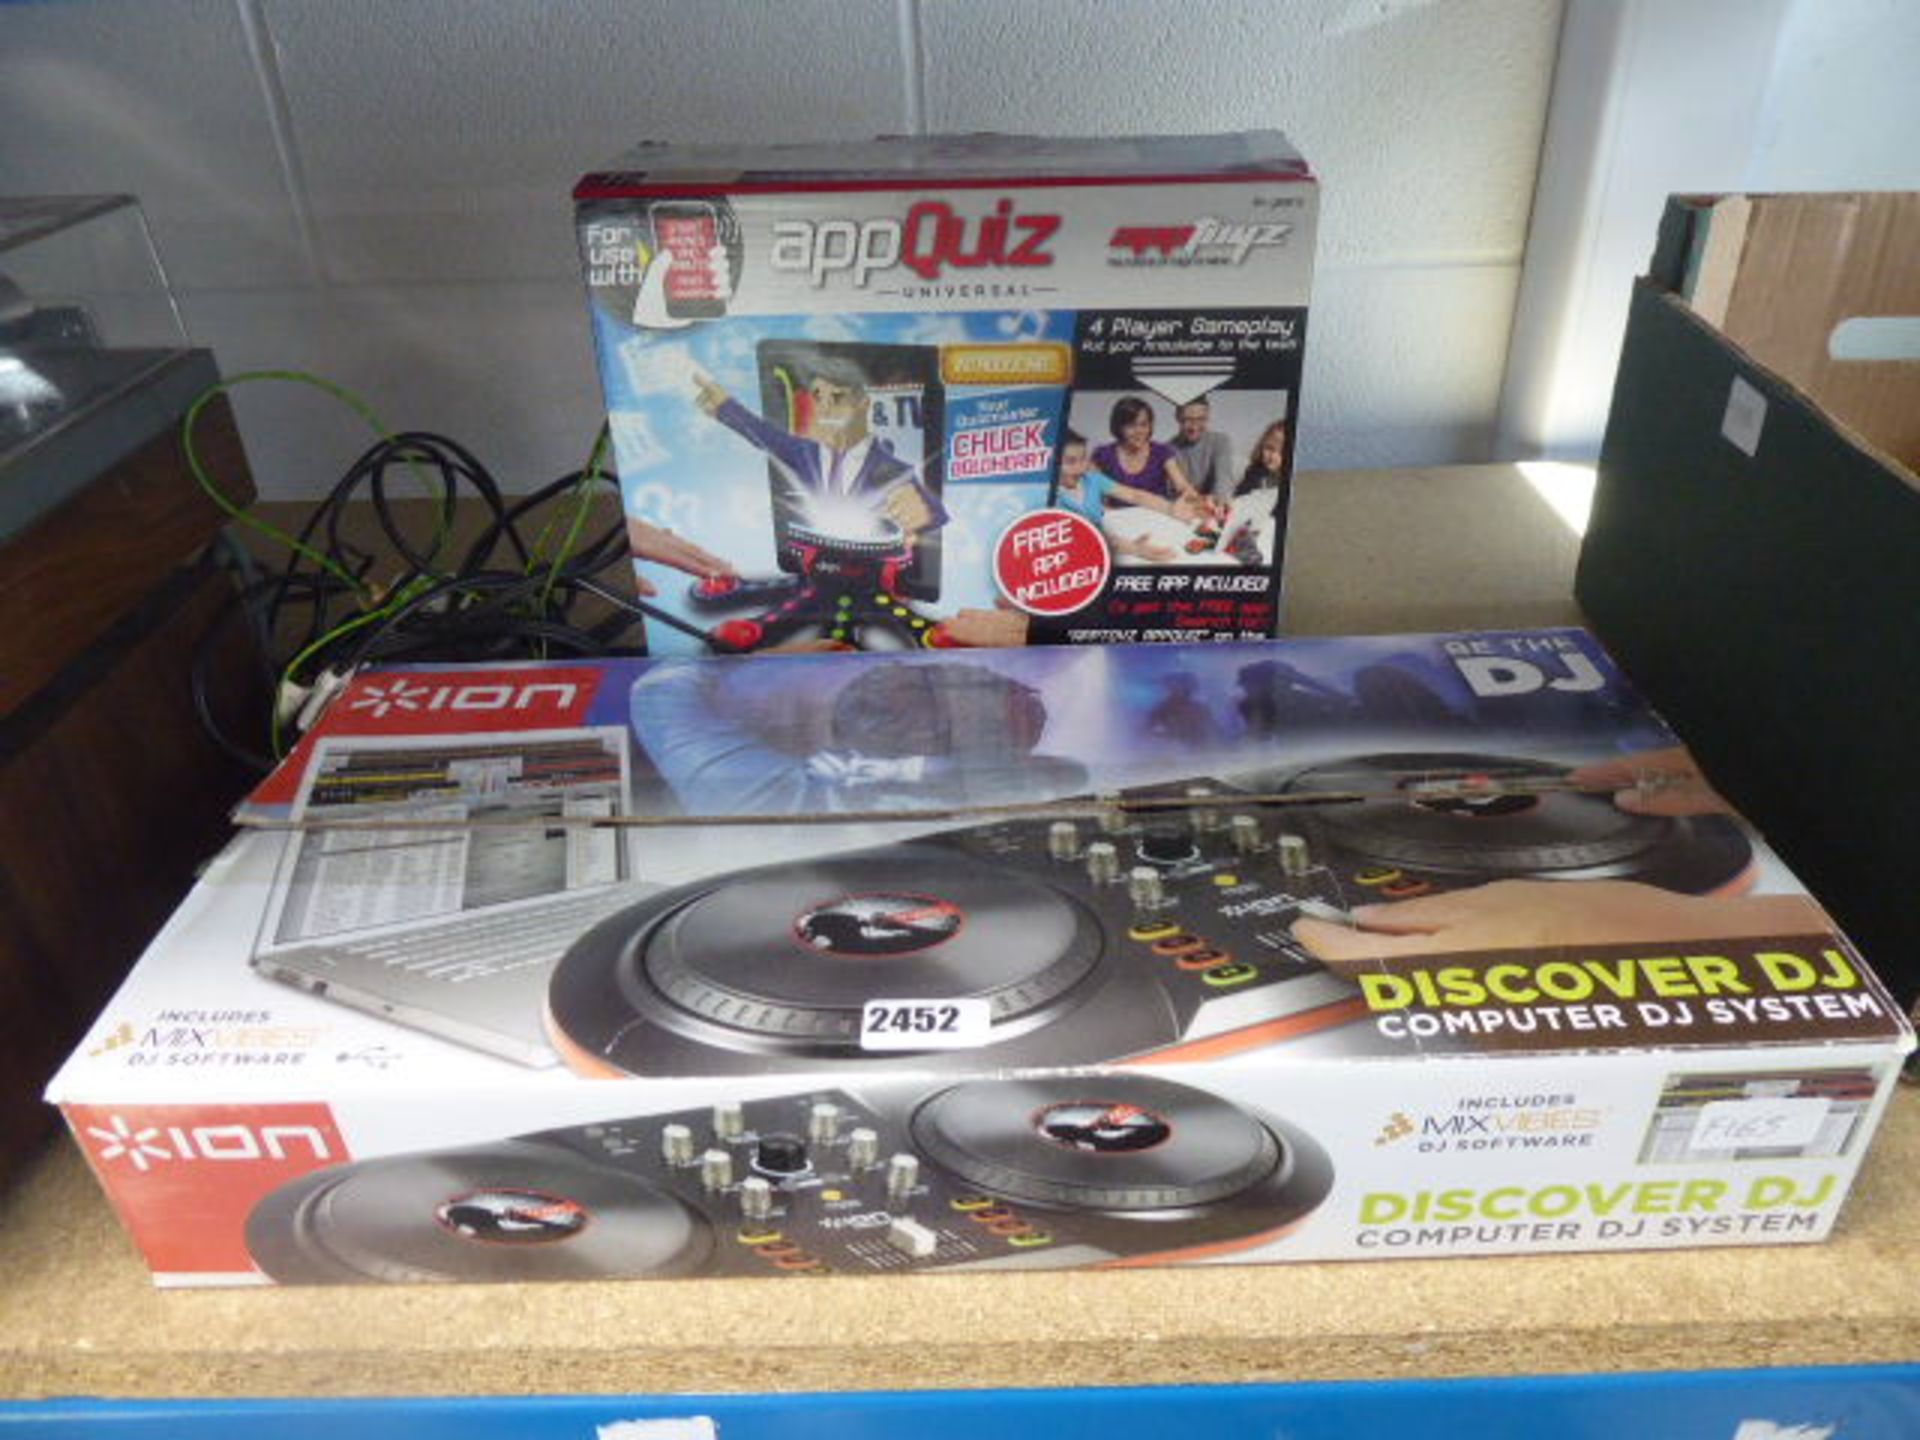 Ion DJ usb computer system together with a quiz game